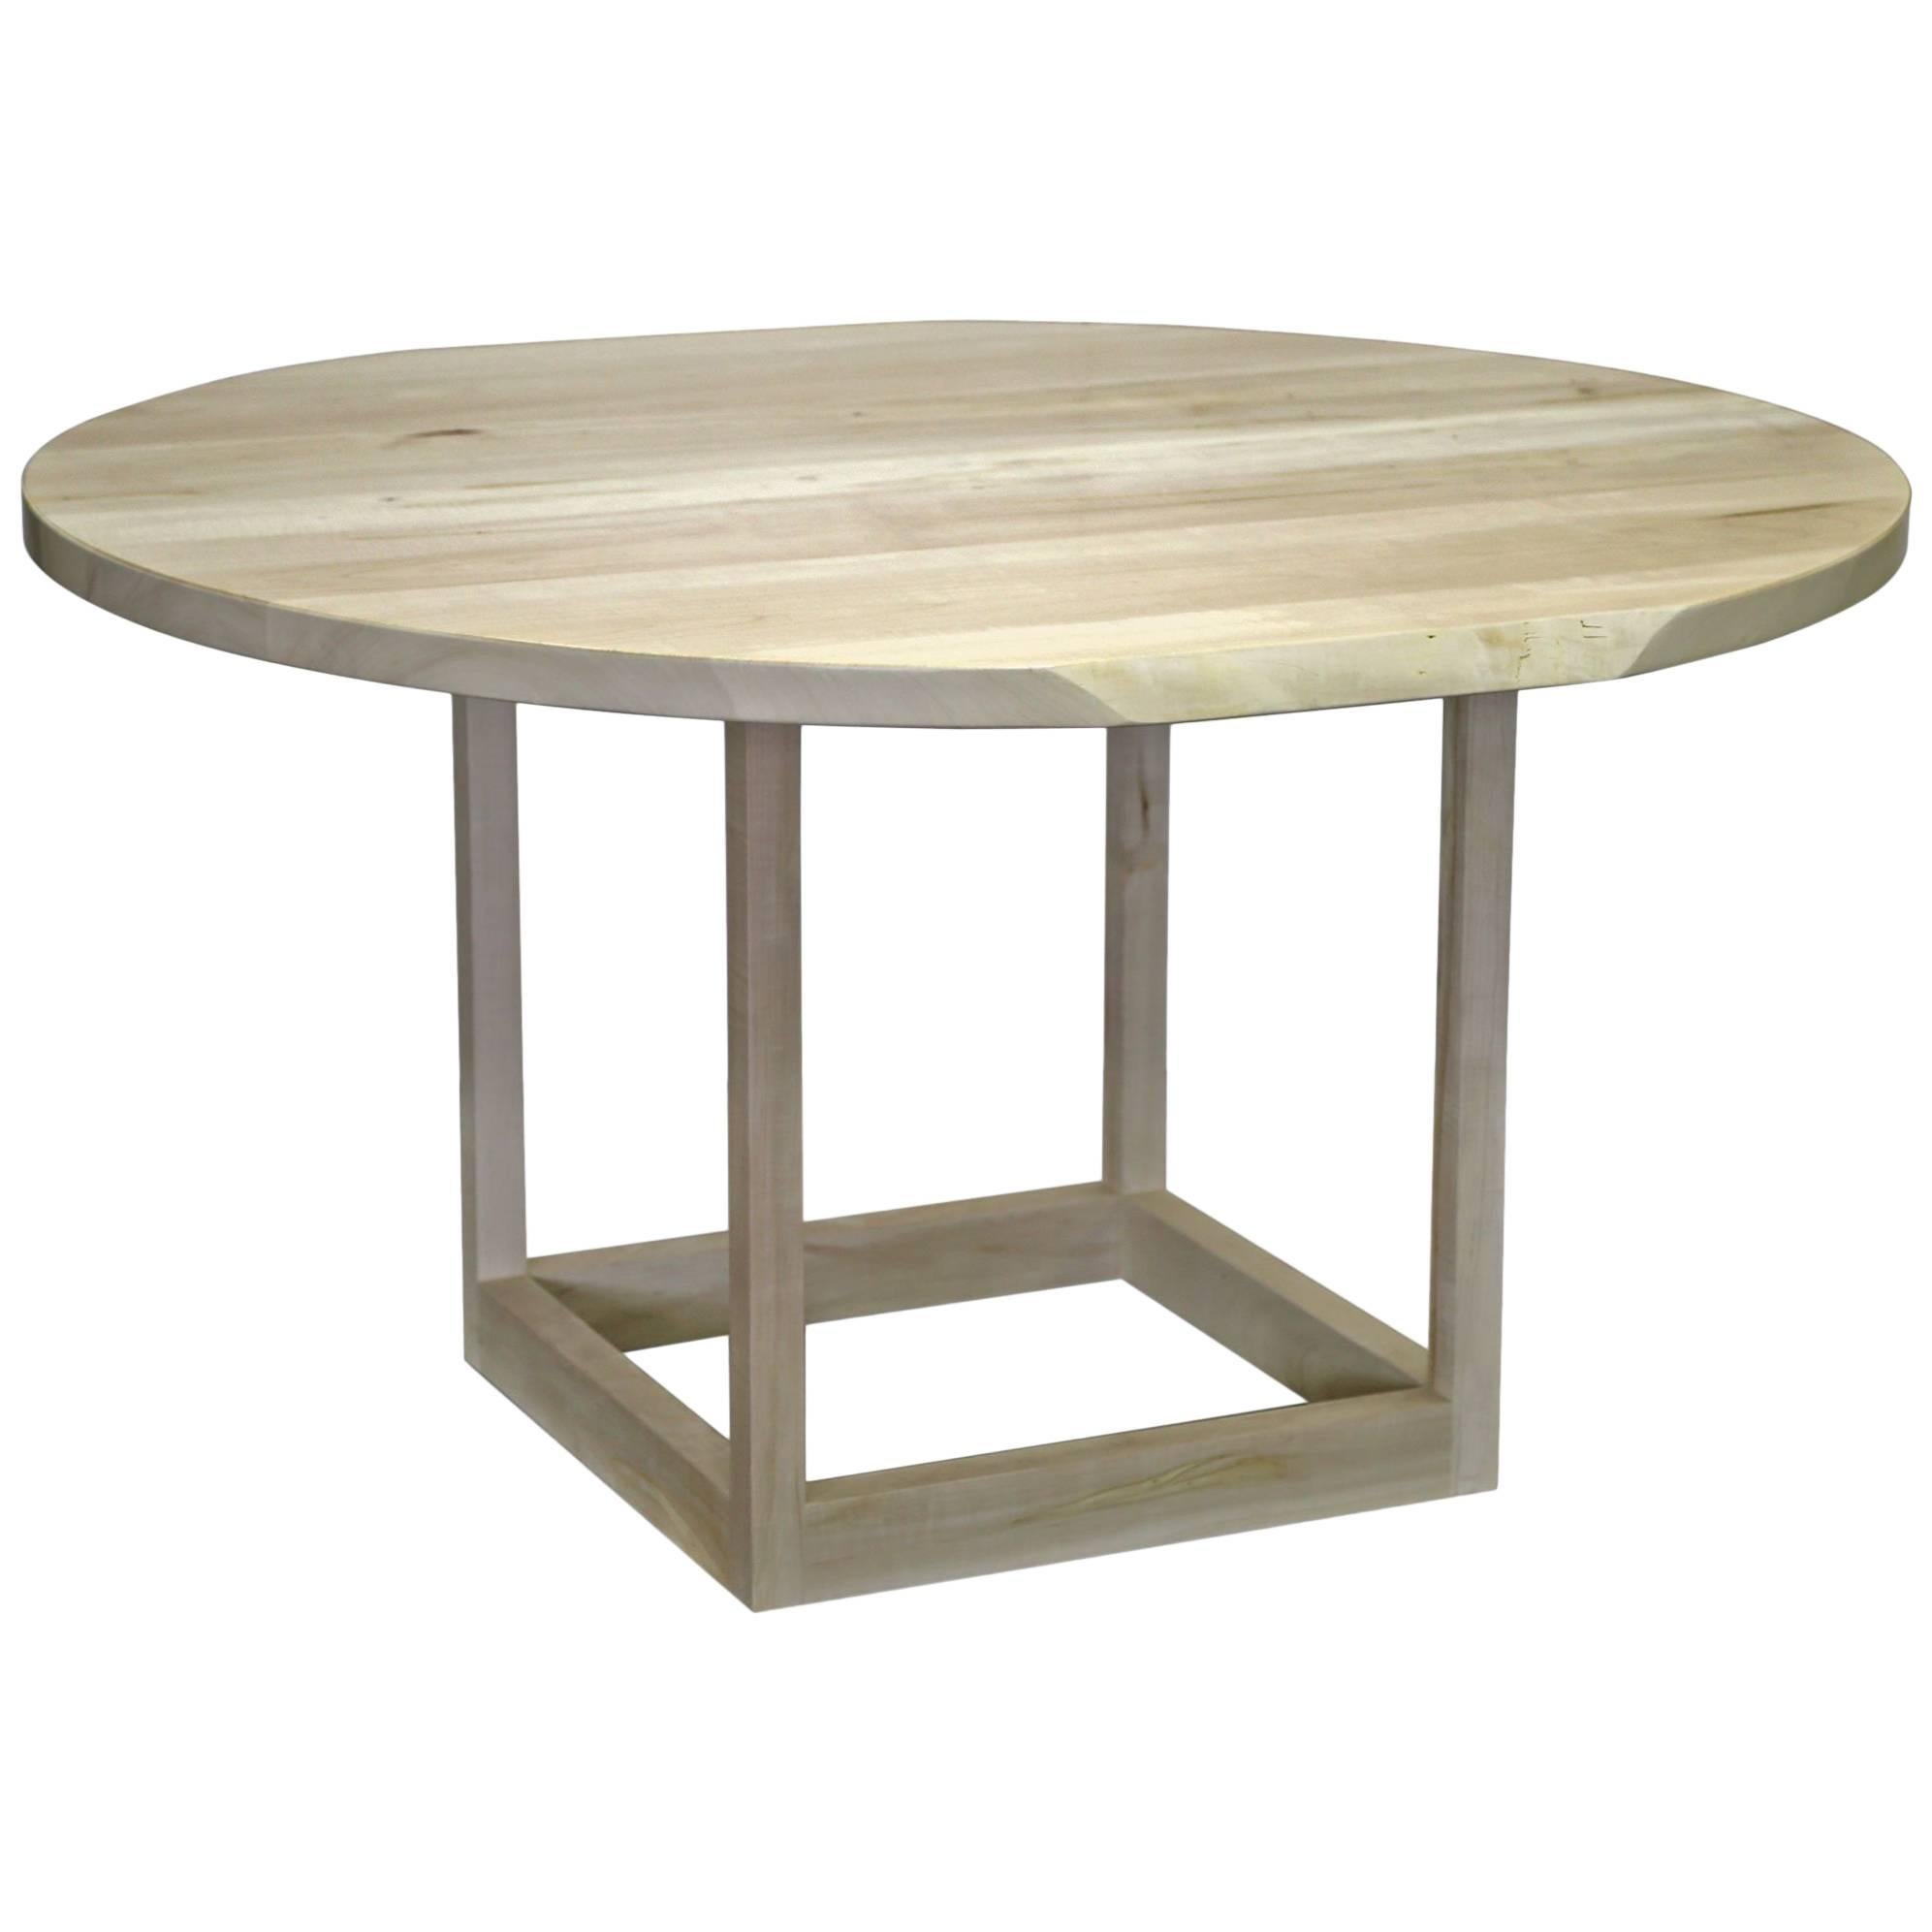 Sentient Flow Round Pedestal Table in Ambrosia Maple with Live Edge For Sale